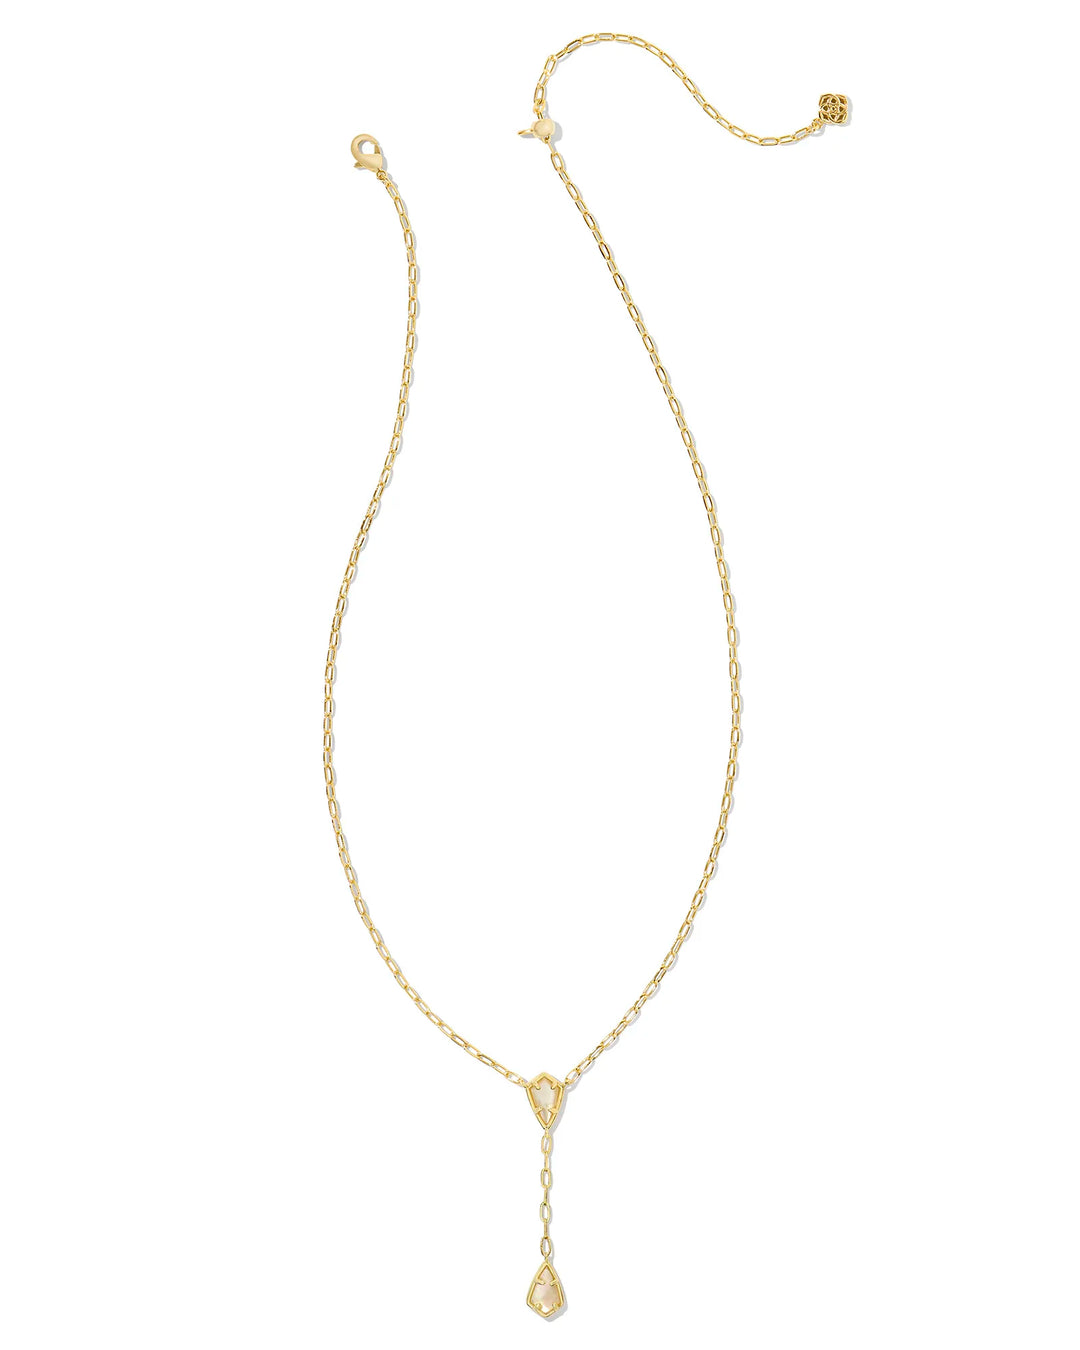 Kendra Scott Camry Y Necklace in Golden Abalone in Gold